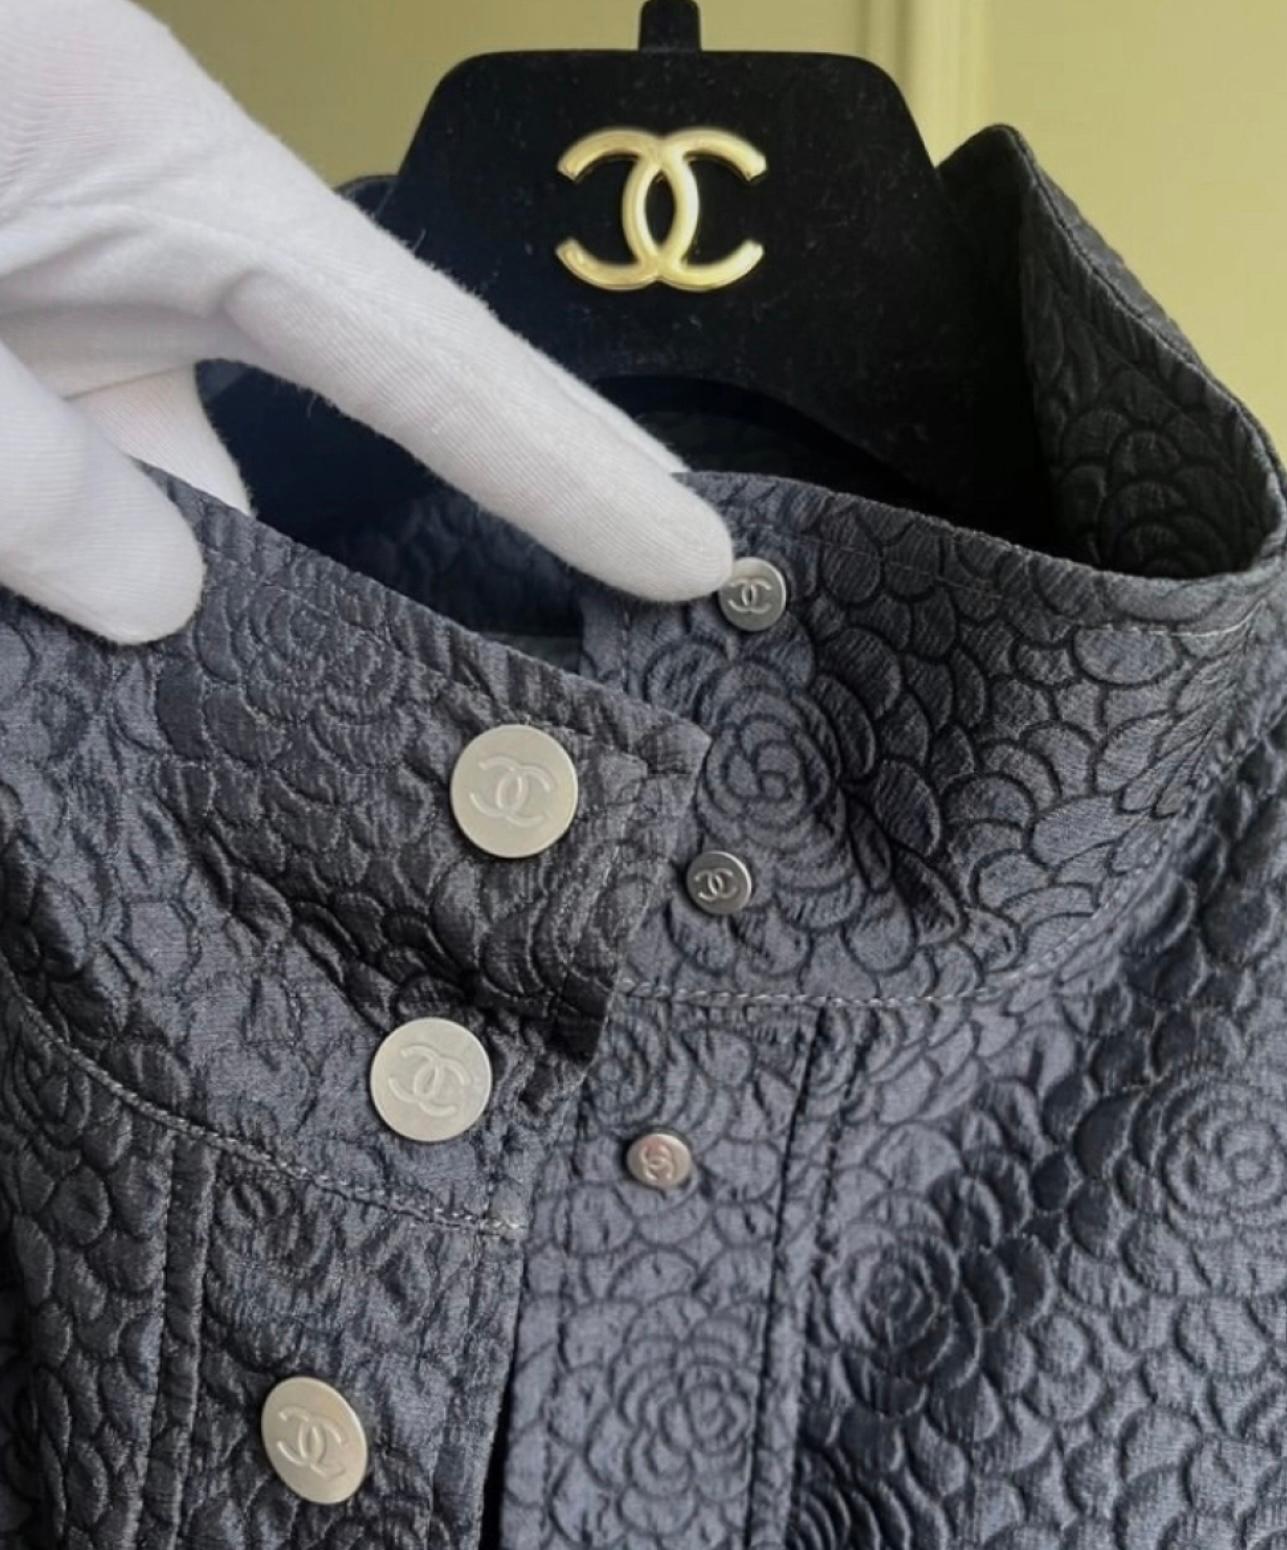 Chanel Iconic Cocoon Style Black Coat with Camellias Pattern In Excellent Condition For Sale In Dubai, AE